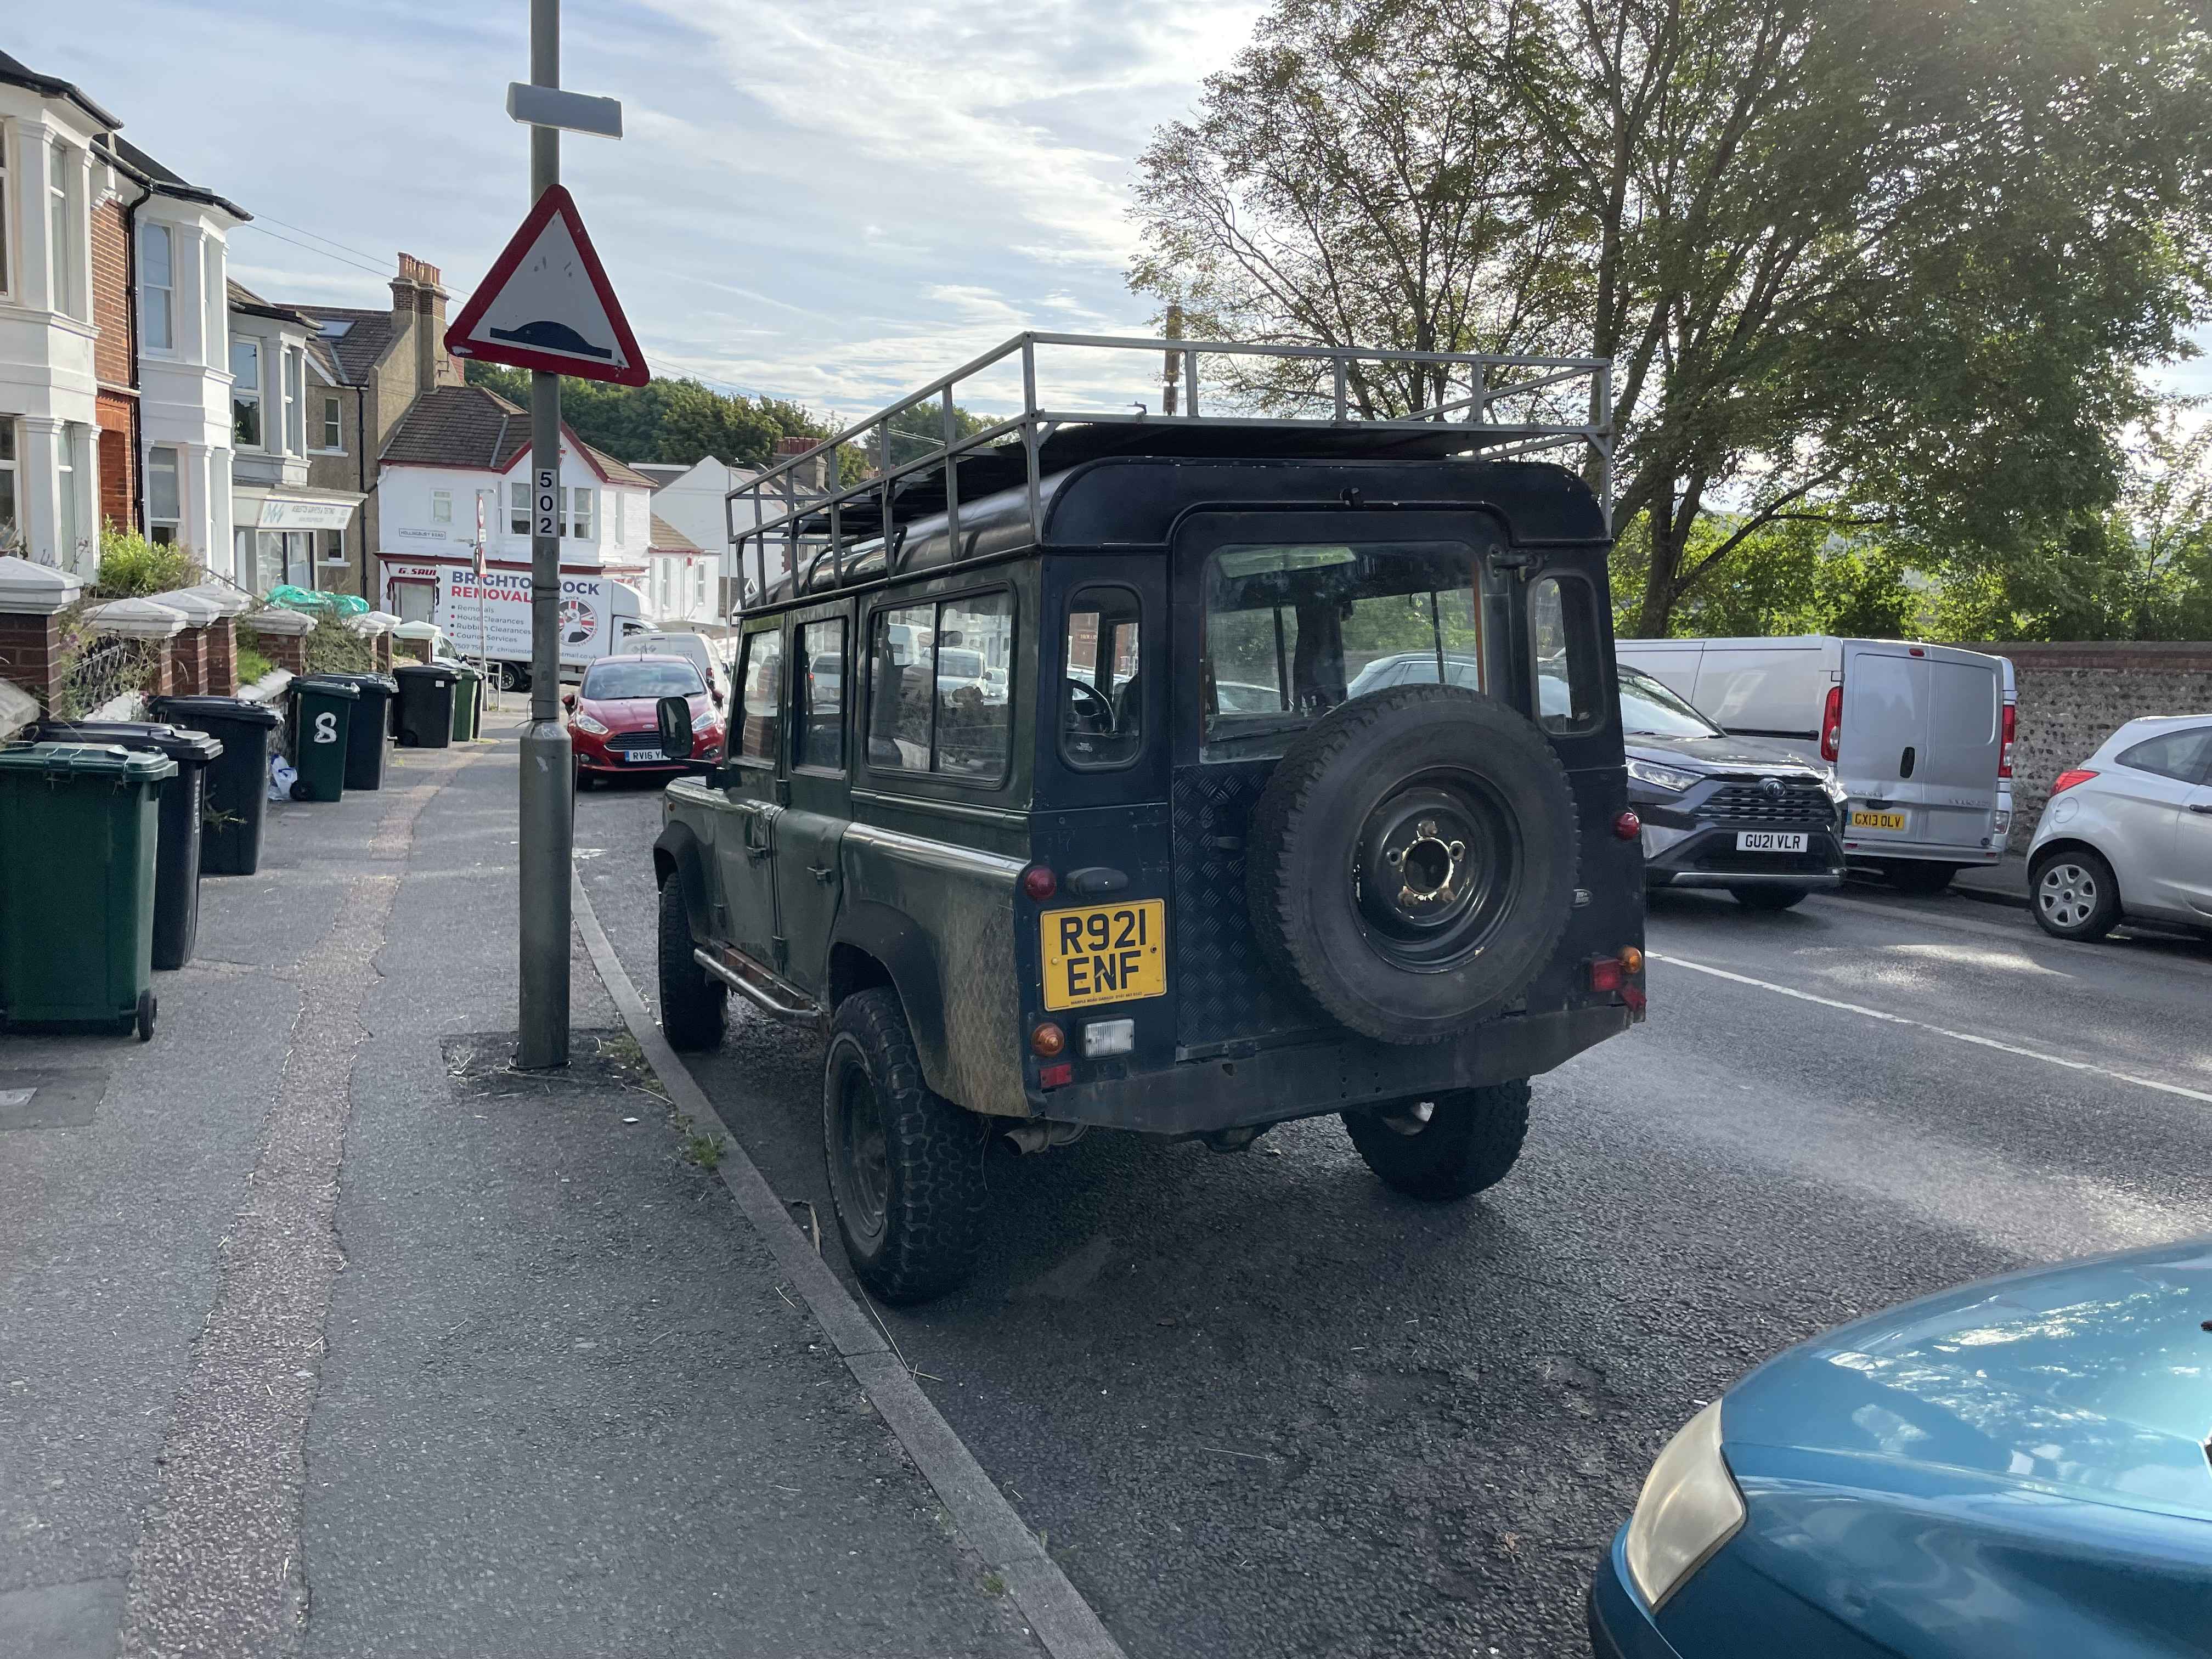 Photograph of R921 ENF - a Green Land Rover Defender parked in Hollingdean by a non-resident. The second of three photographs supplied by the residents of Hollingdean.